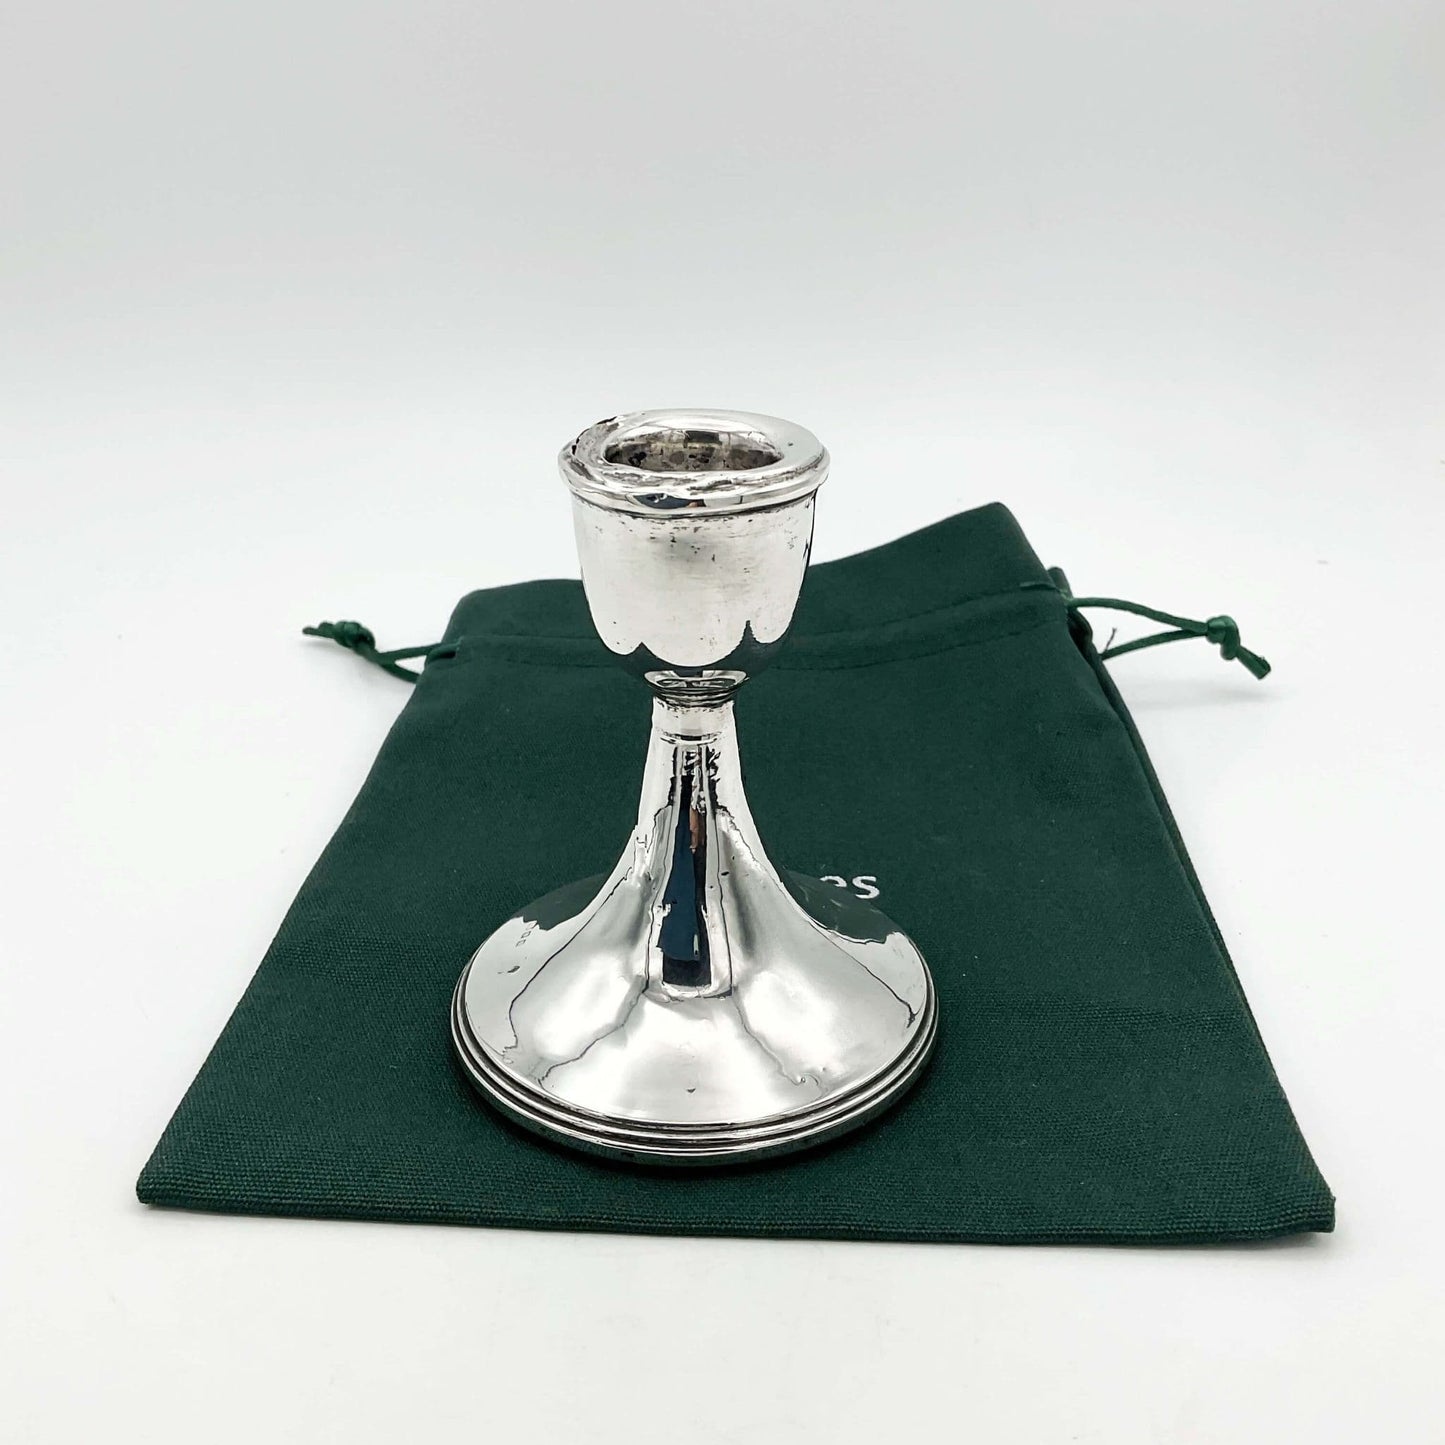 A single silver candlestick sitting on a green cotton bag